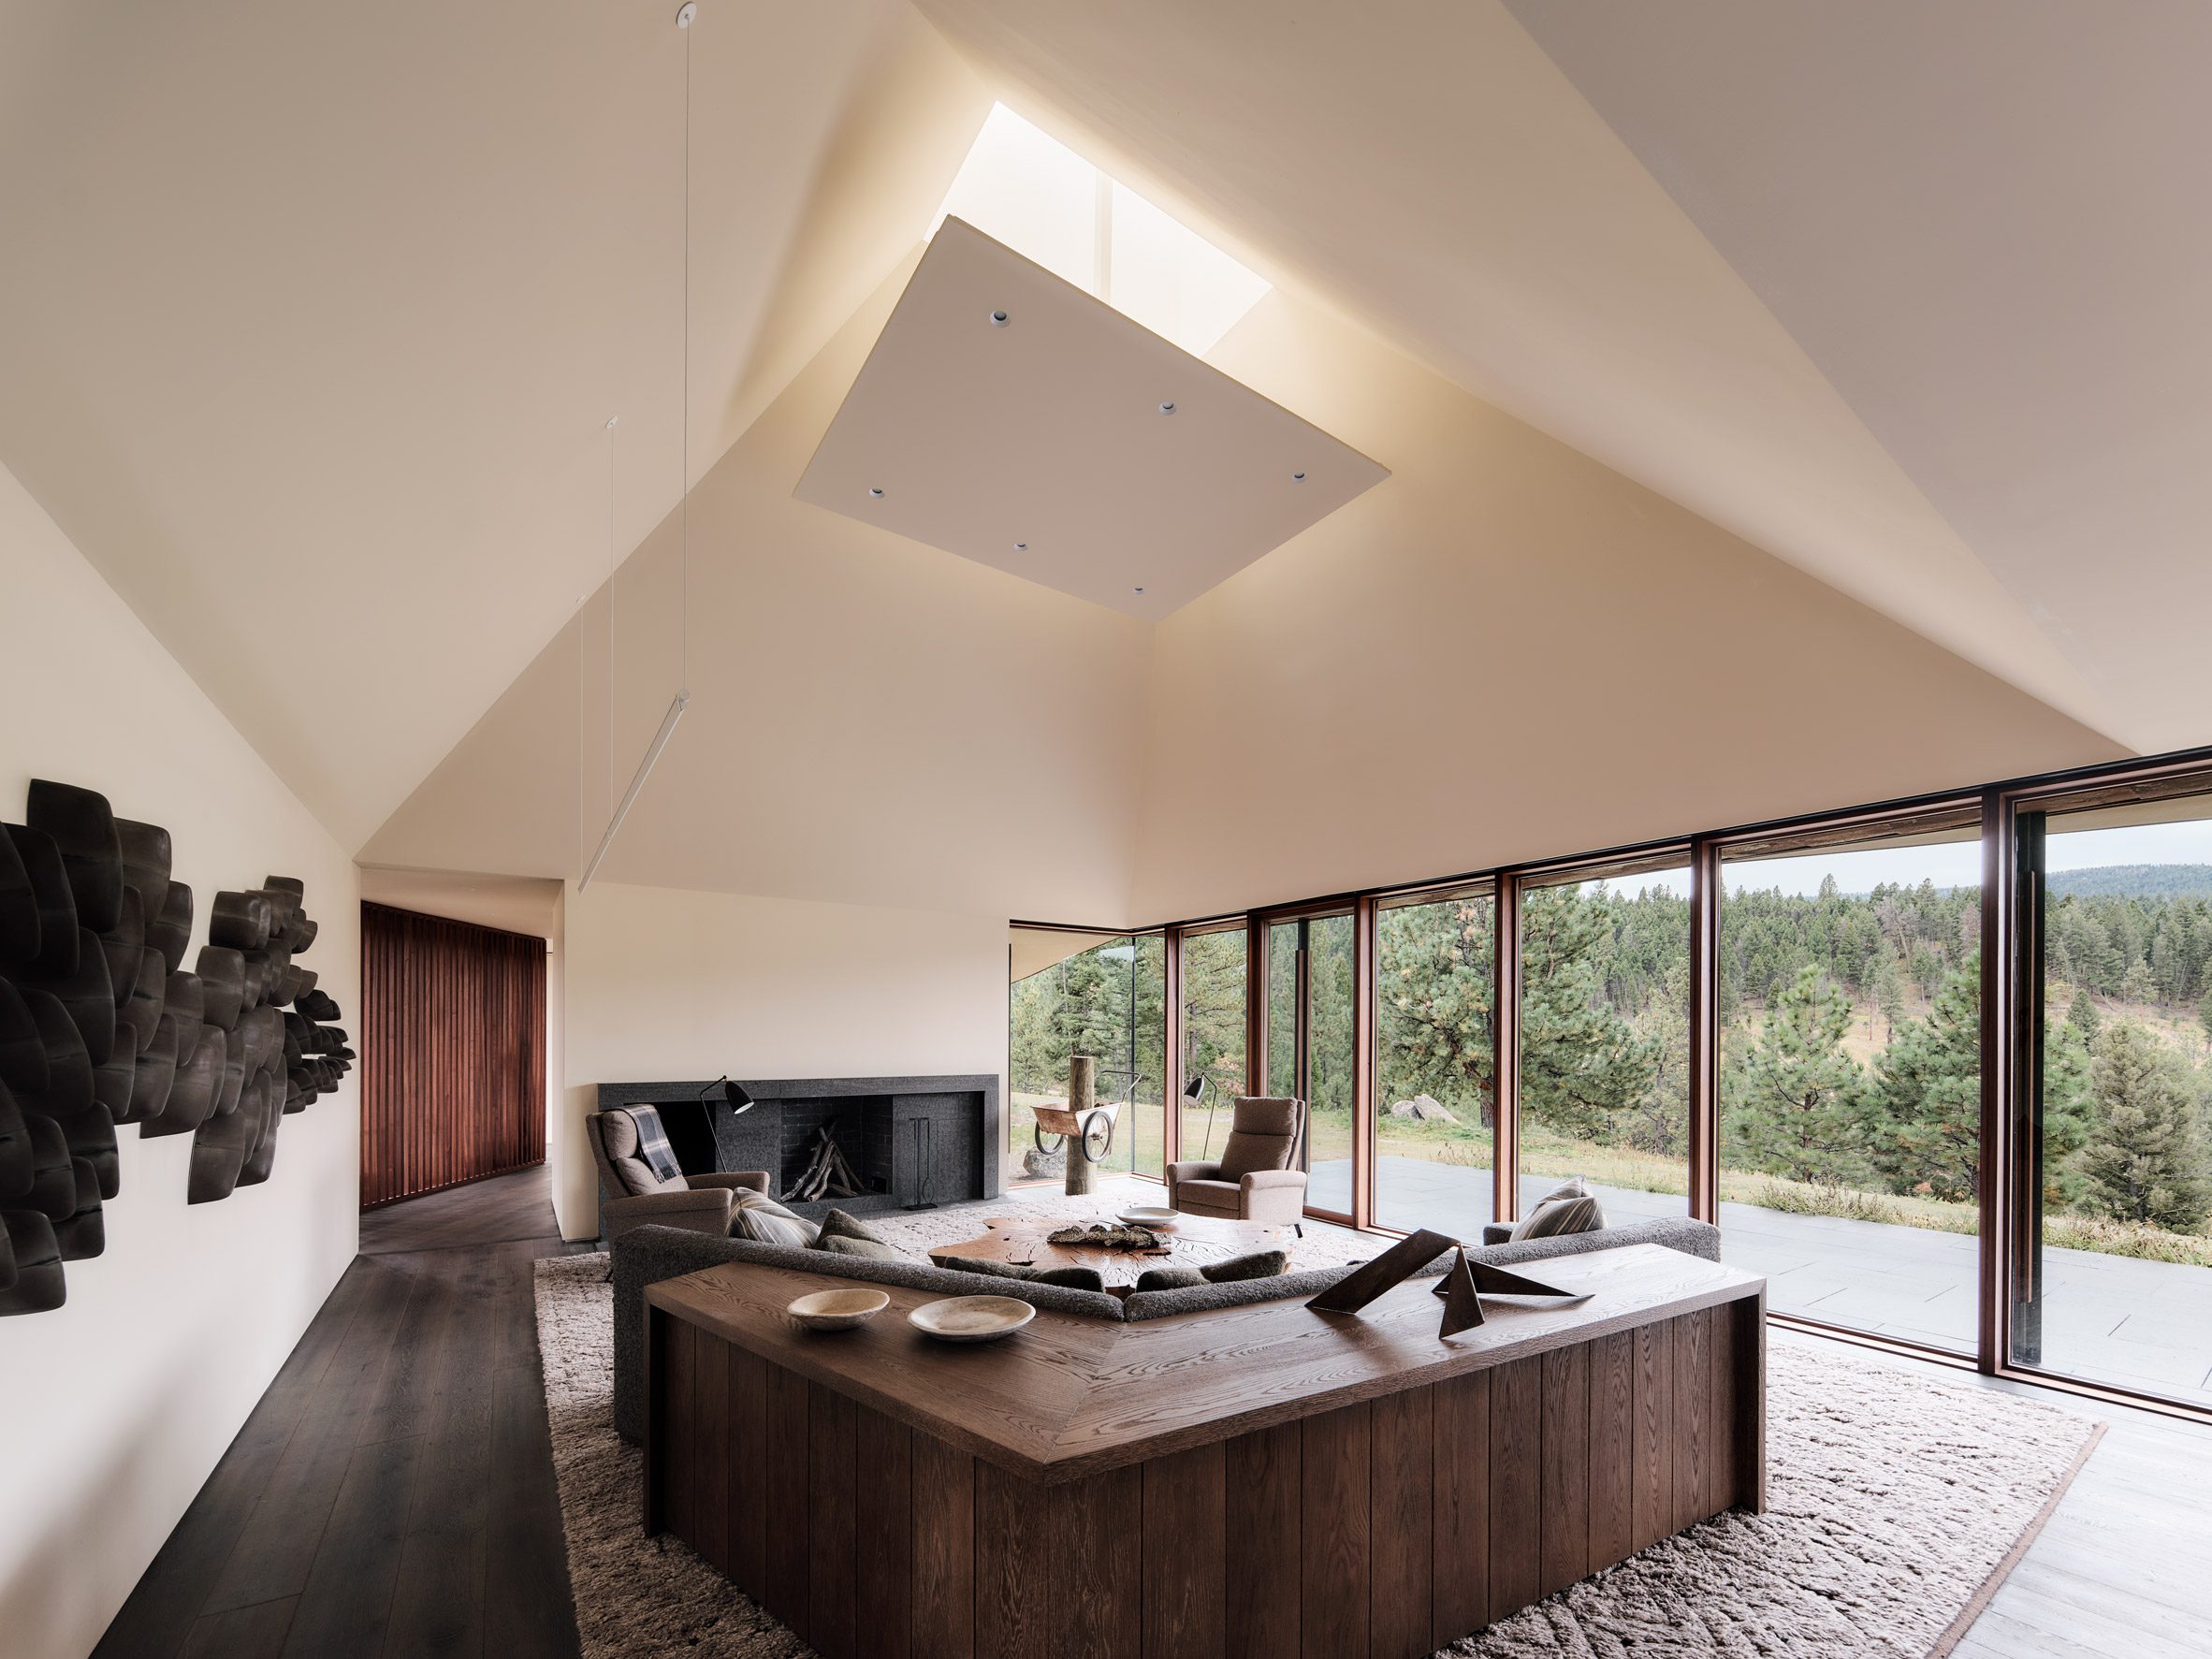 Living space with a pyramidal roof